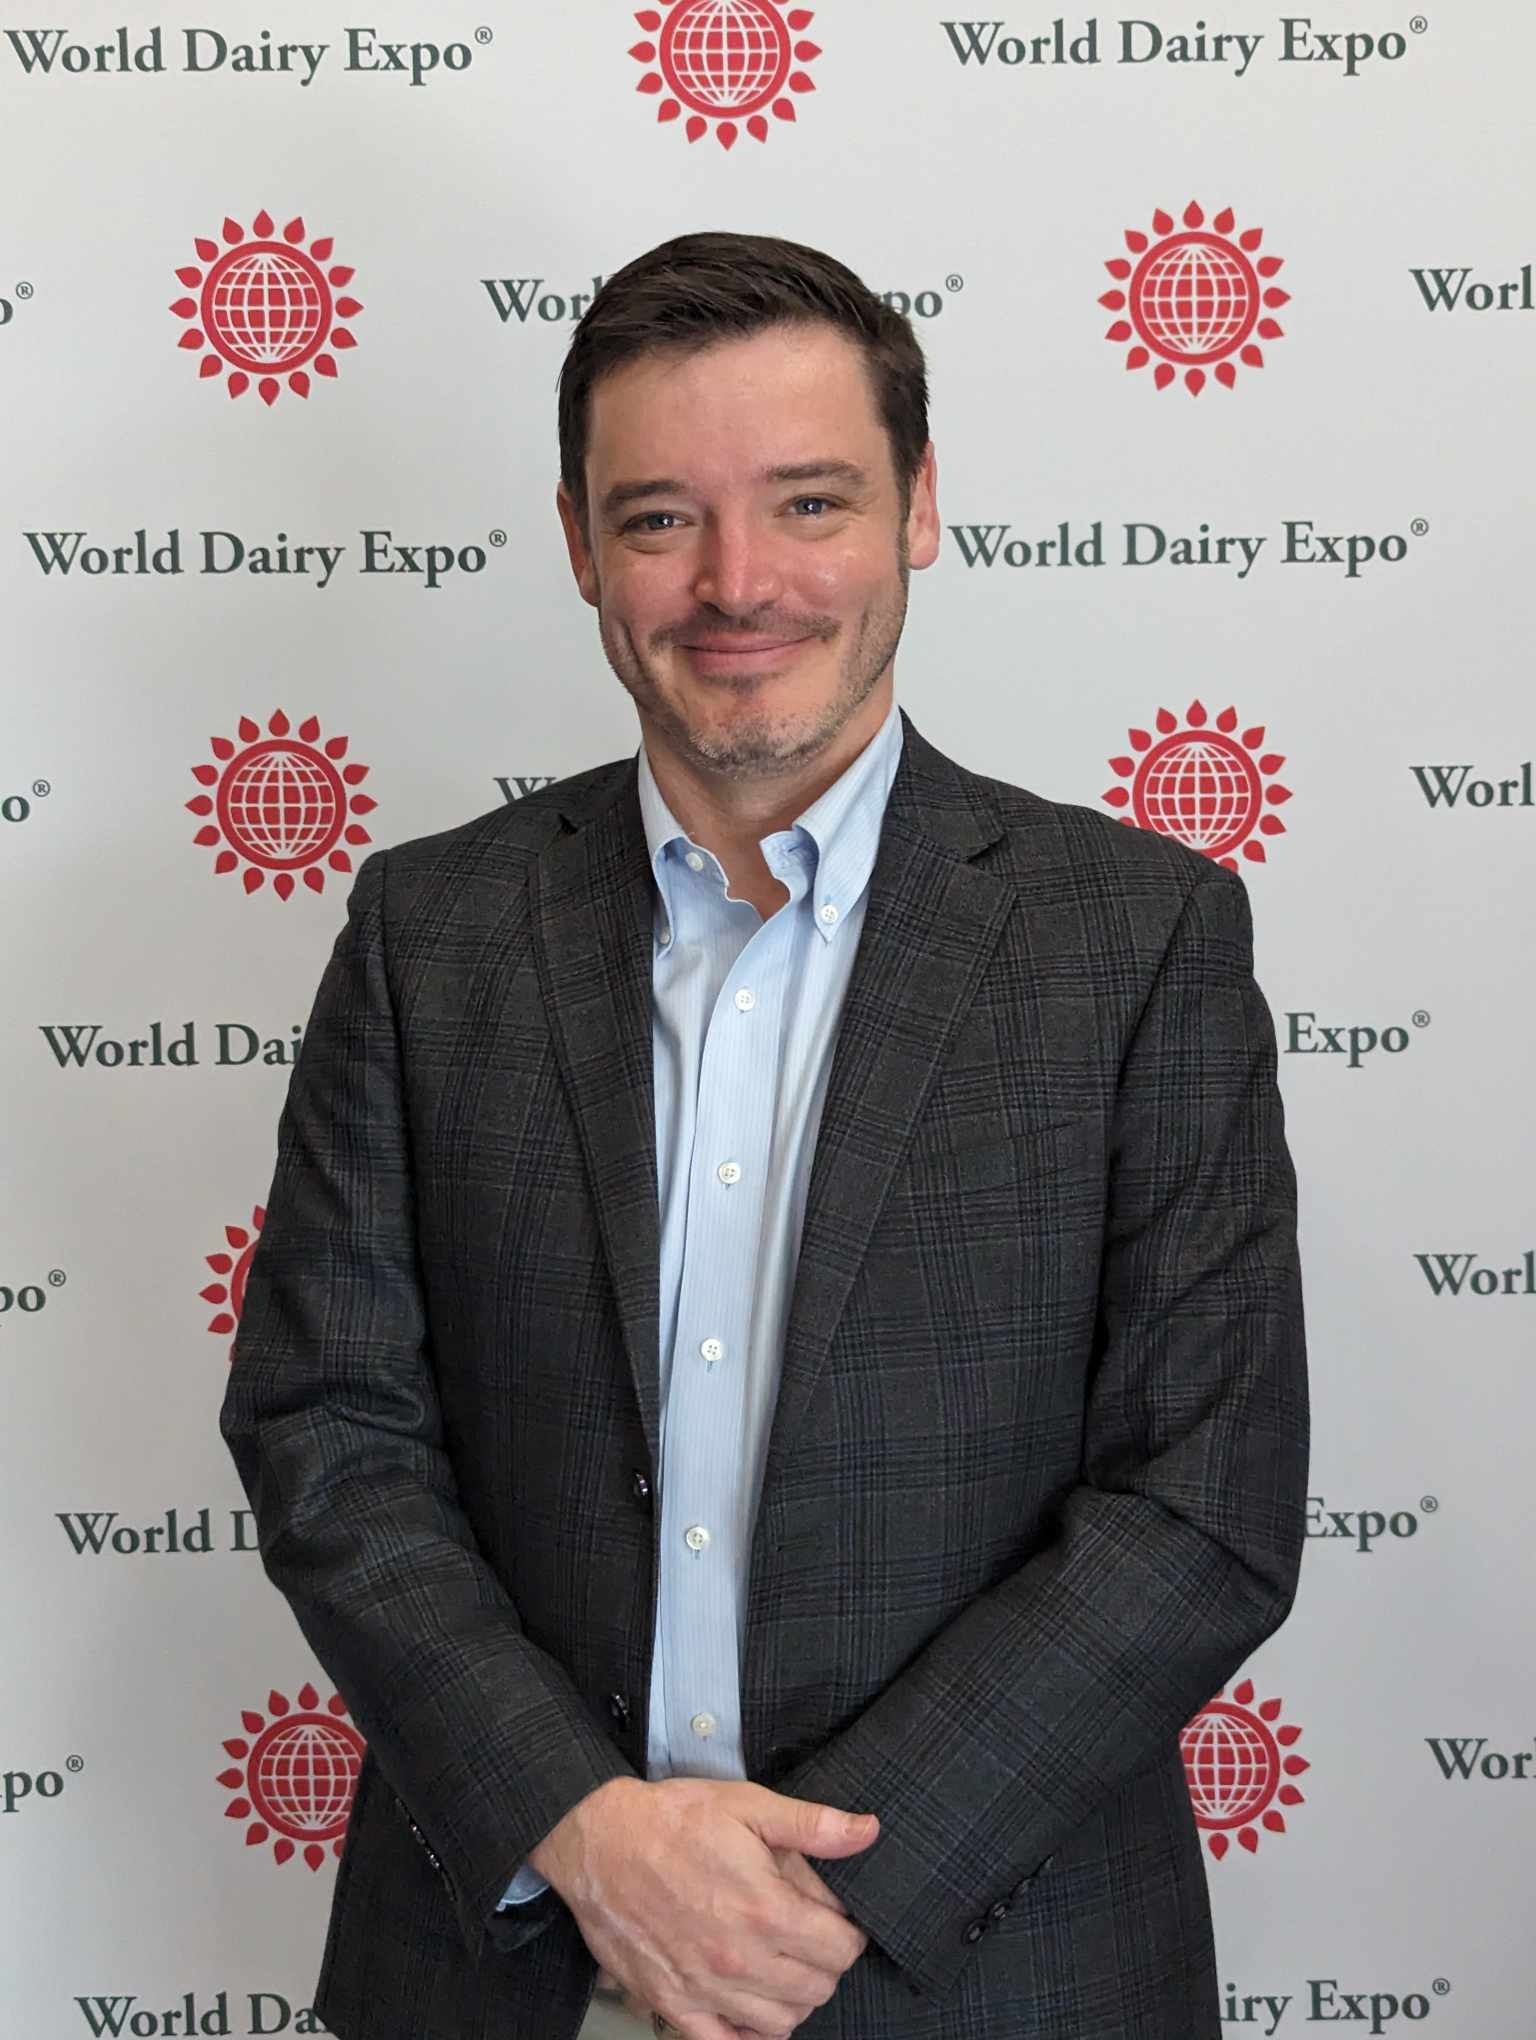 Dairy Analyst Provides Perspective